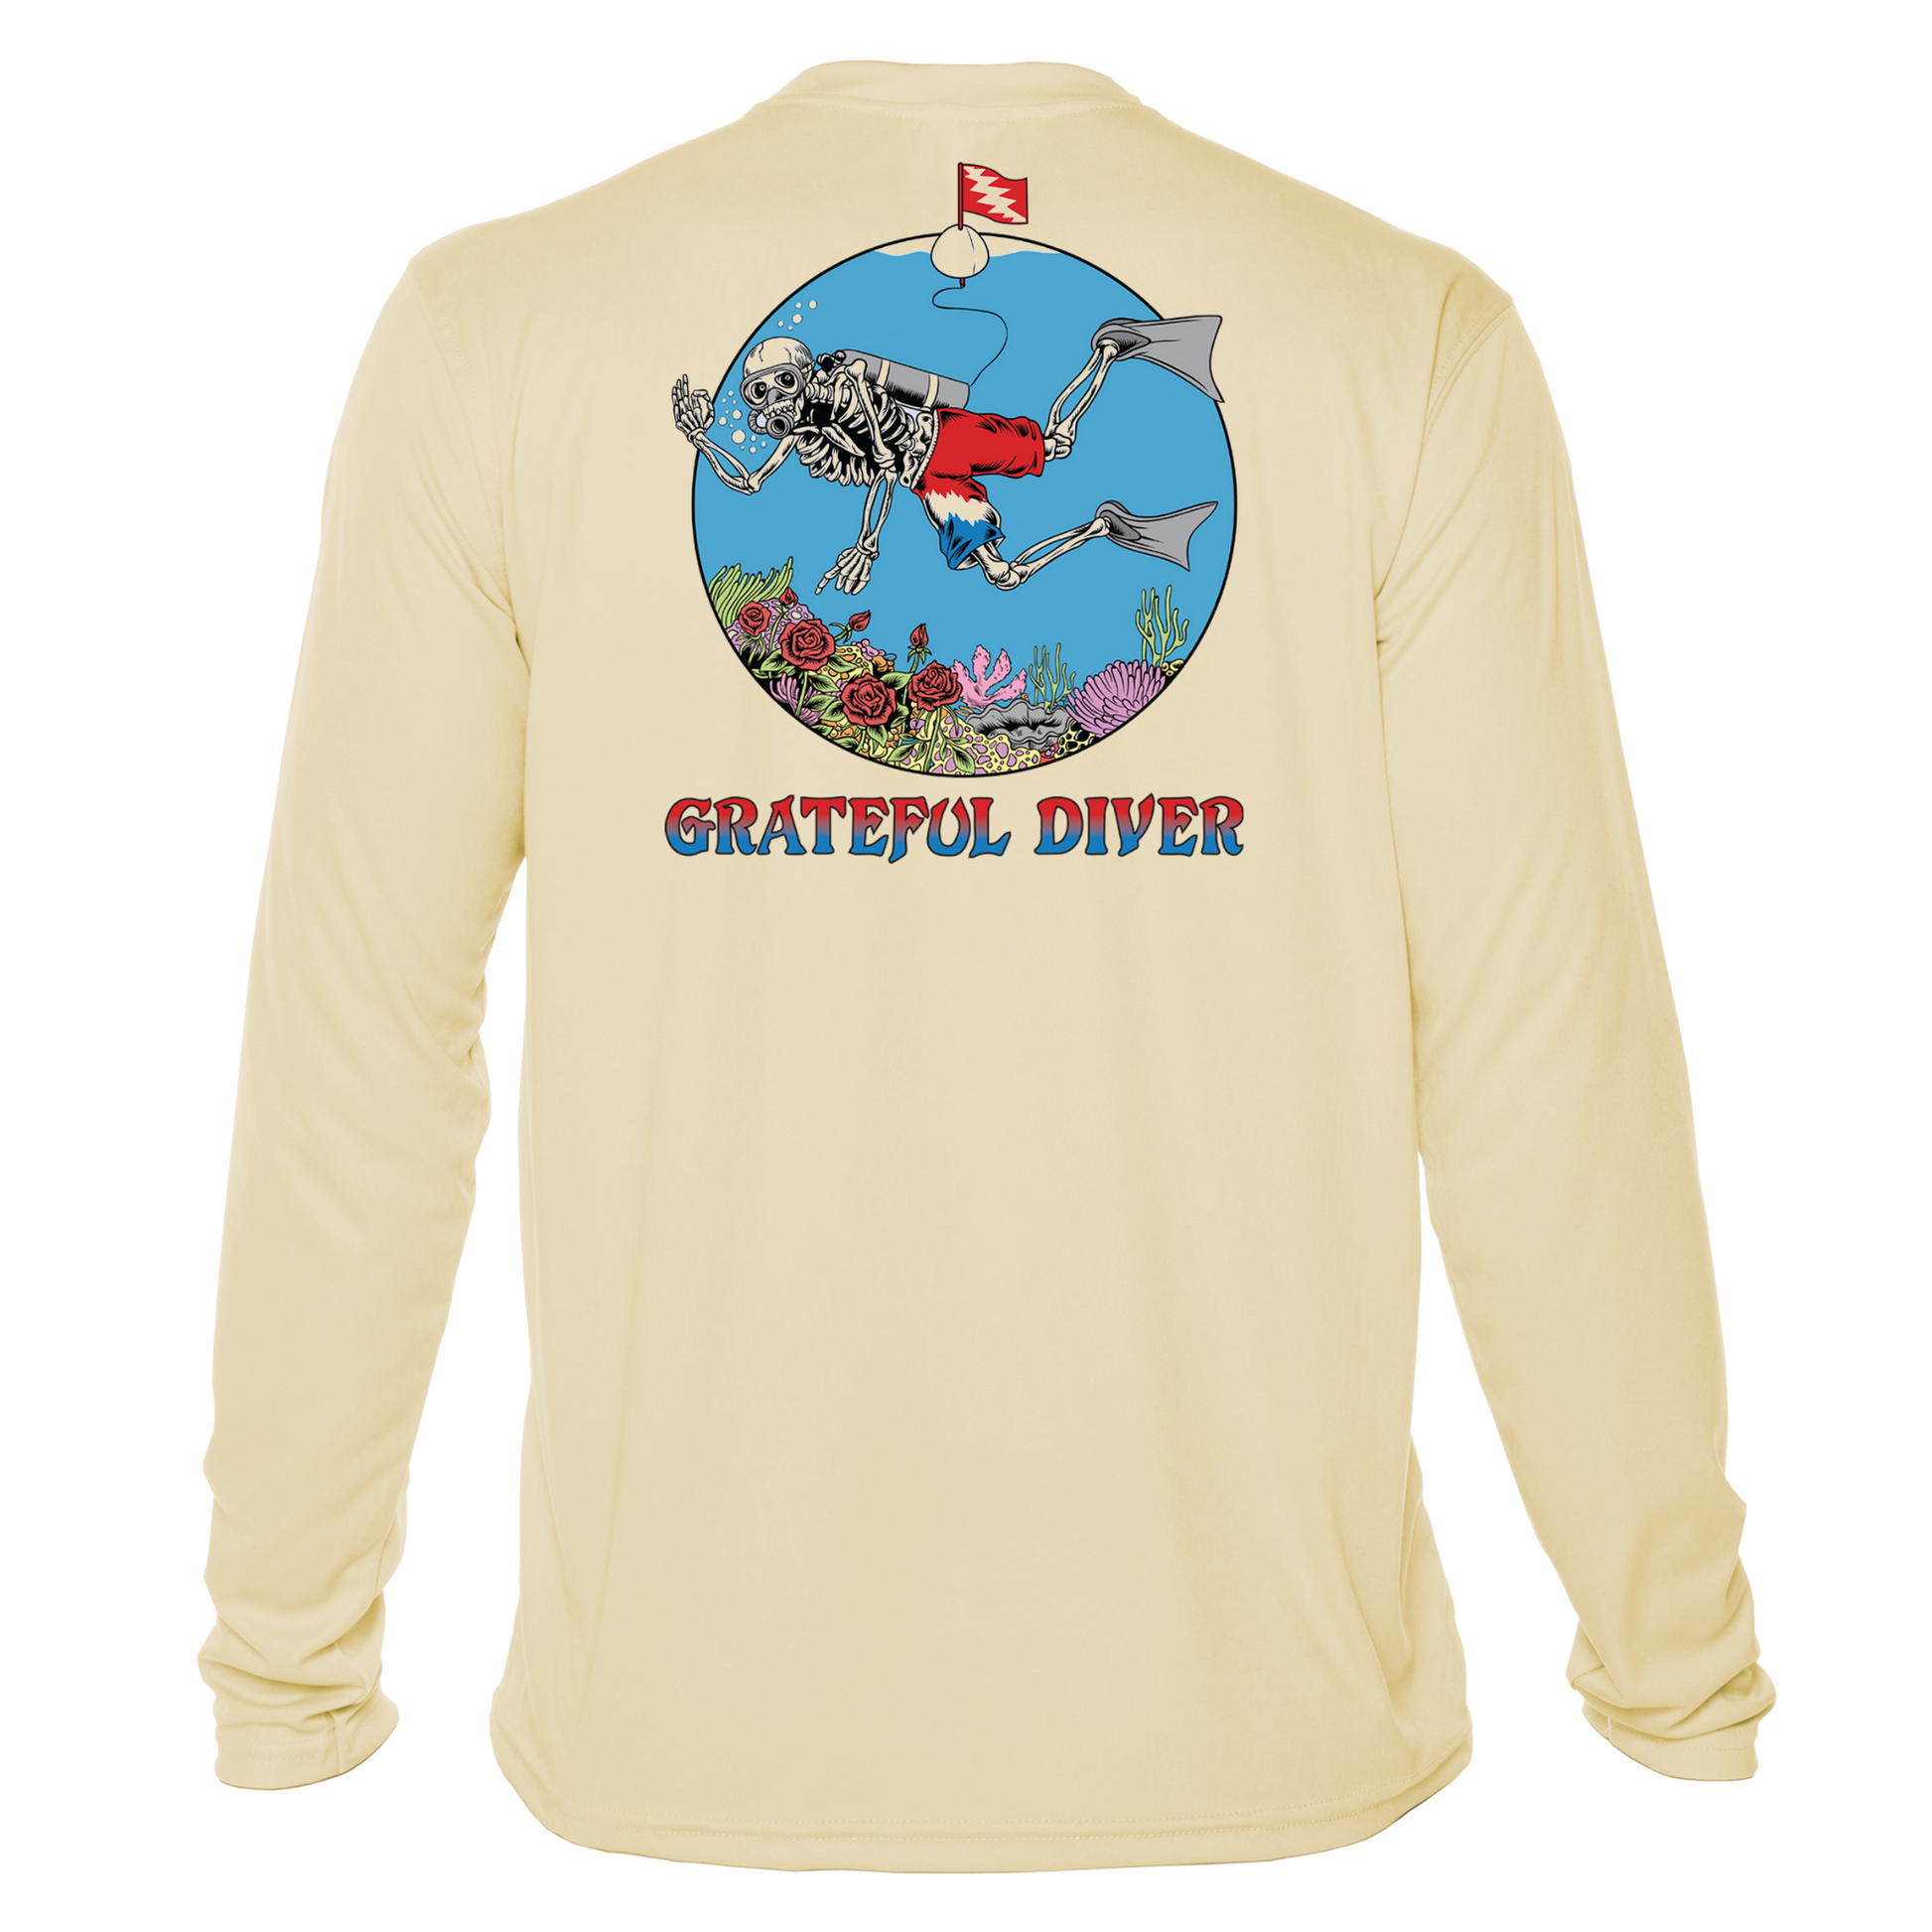 Grateful Diver Skeleton Diver UV Shirt in pale yellow showing the back off figure